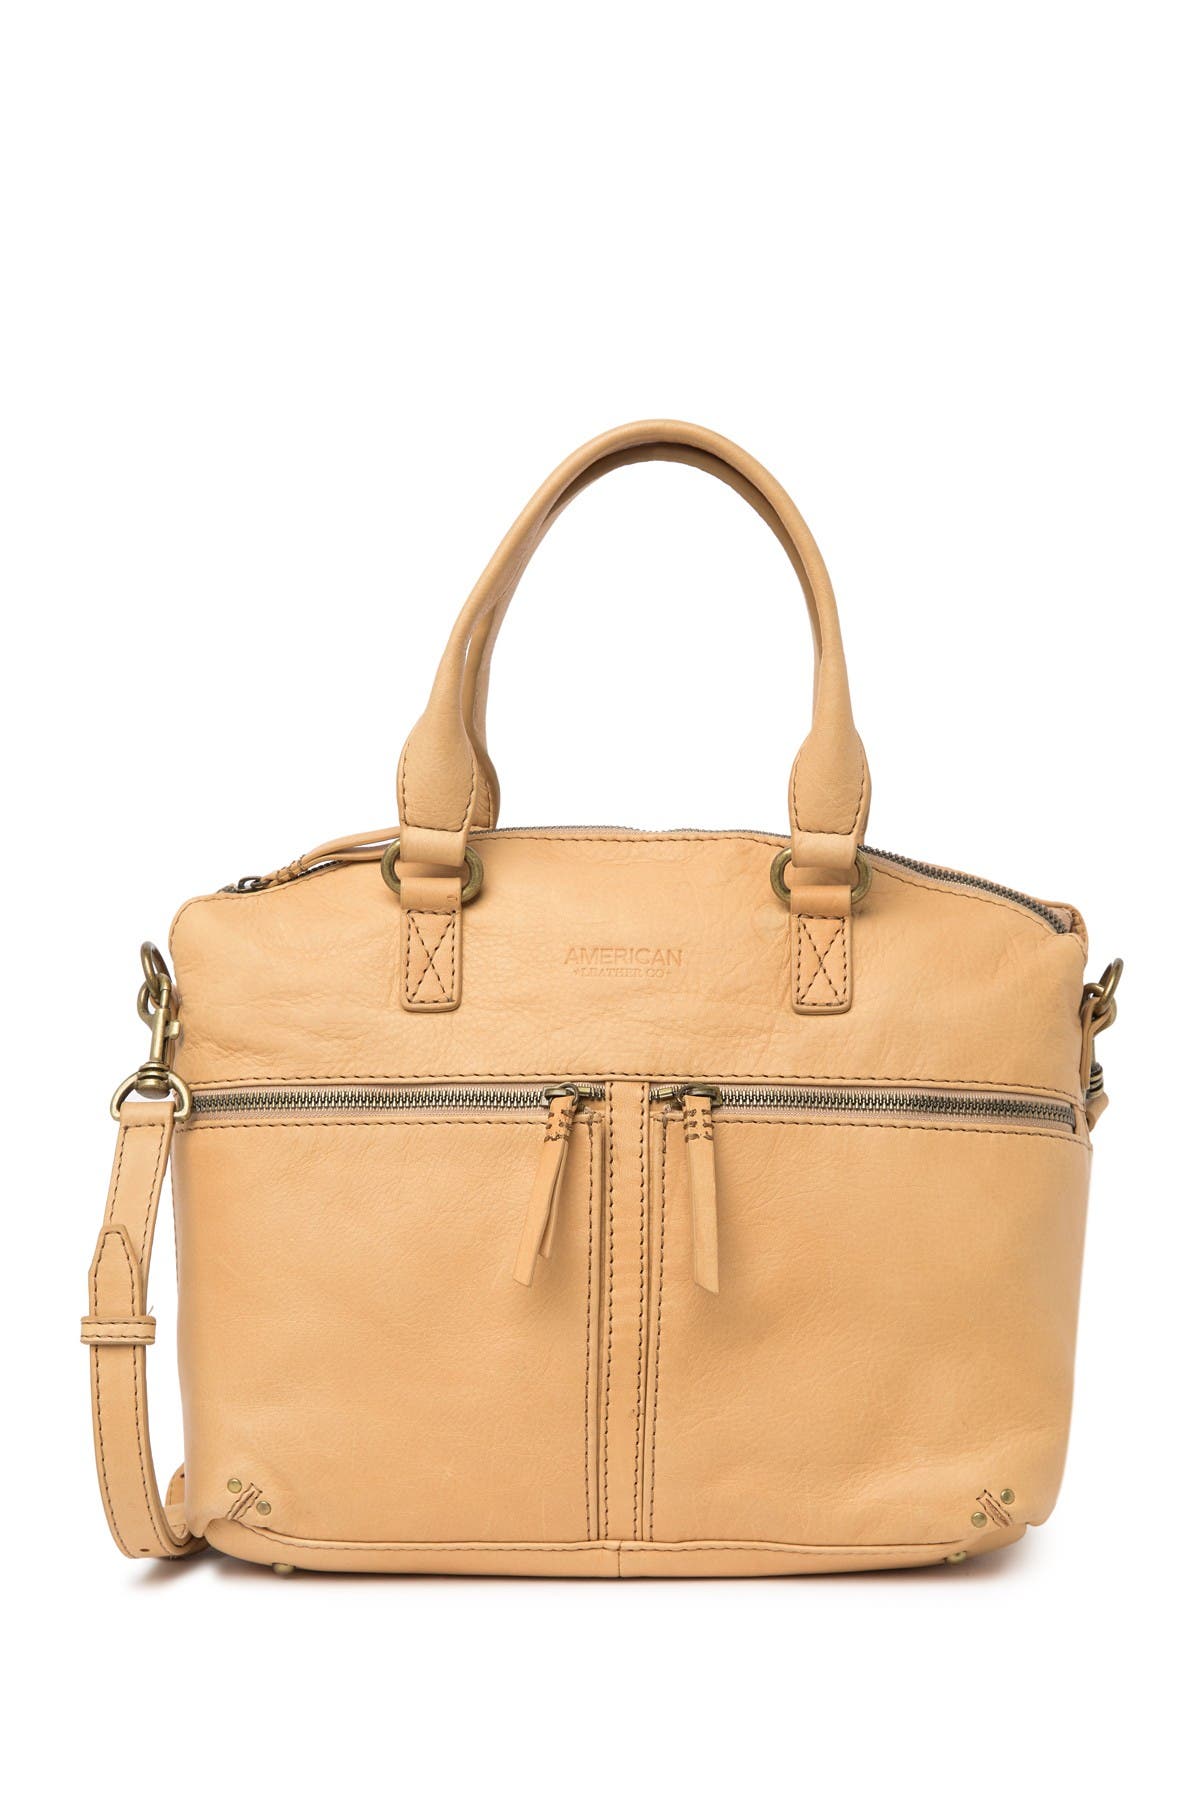 American Leather Co. Hanover Smooth Leather Satchel In Medium Beige